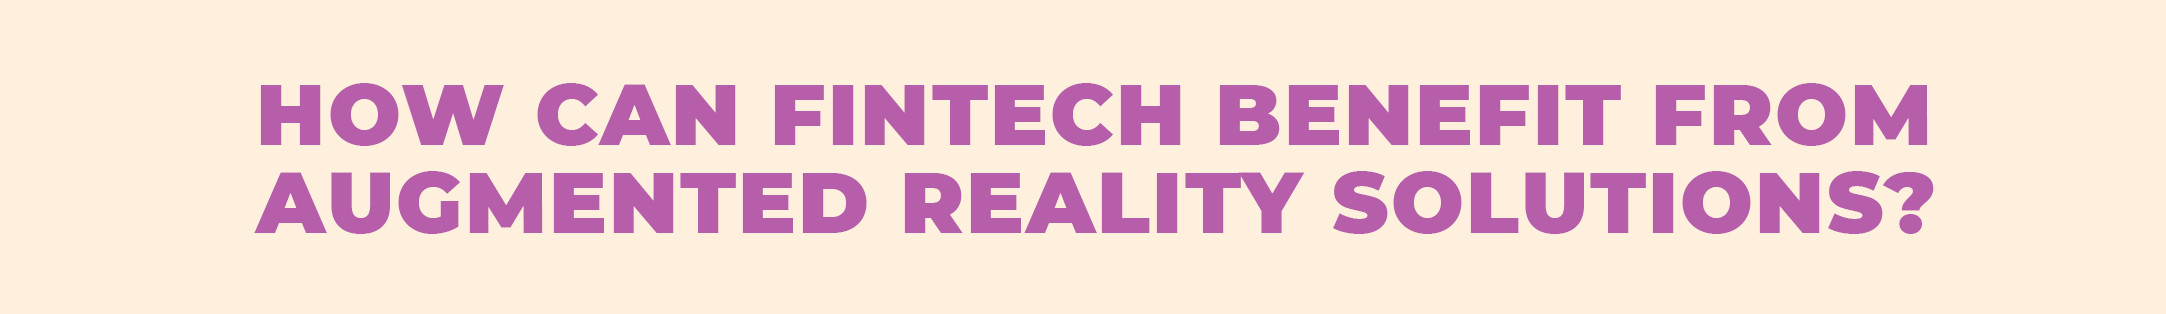 How Can FinTech Benefit from Augmented Reality Solutions